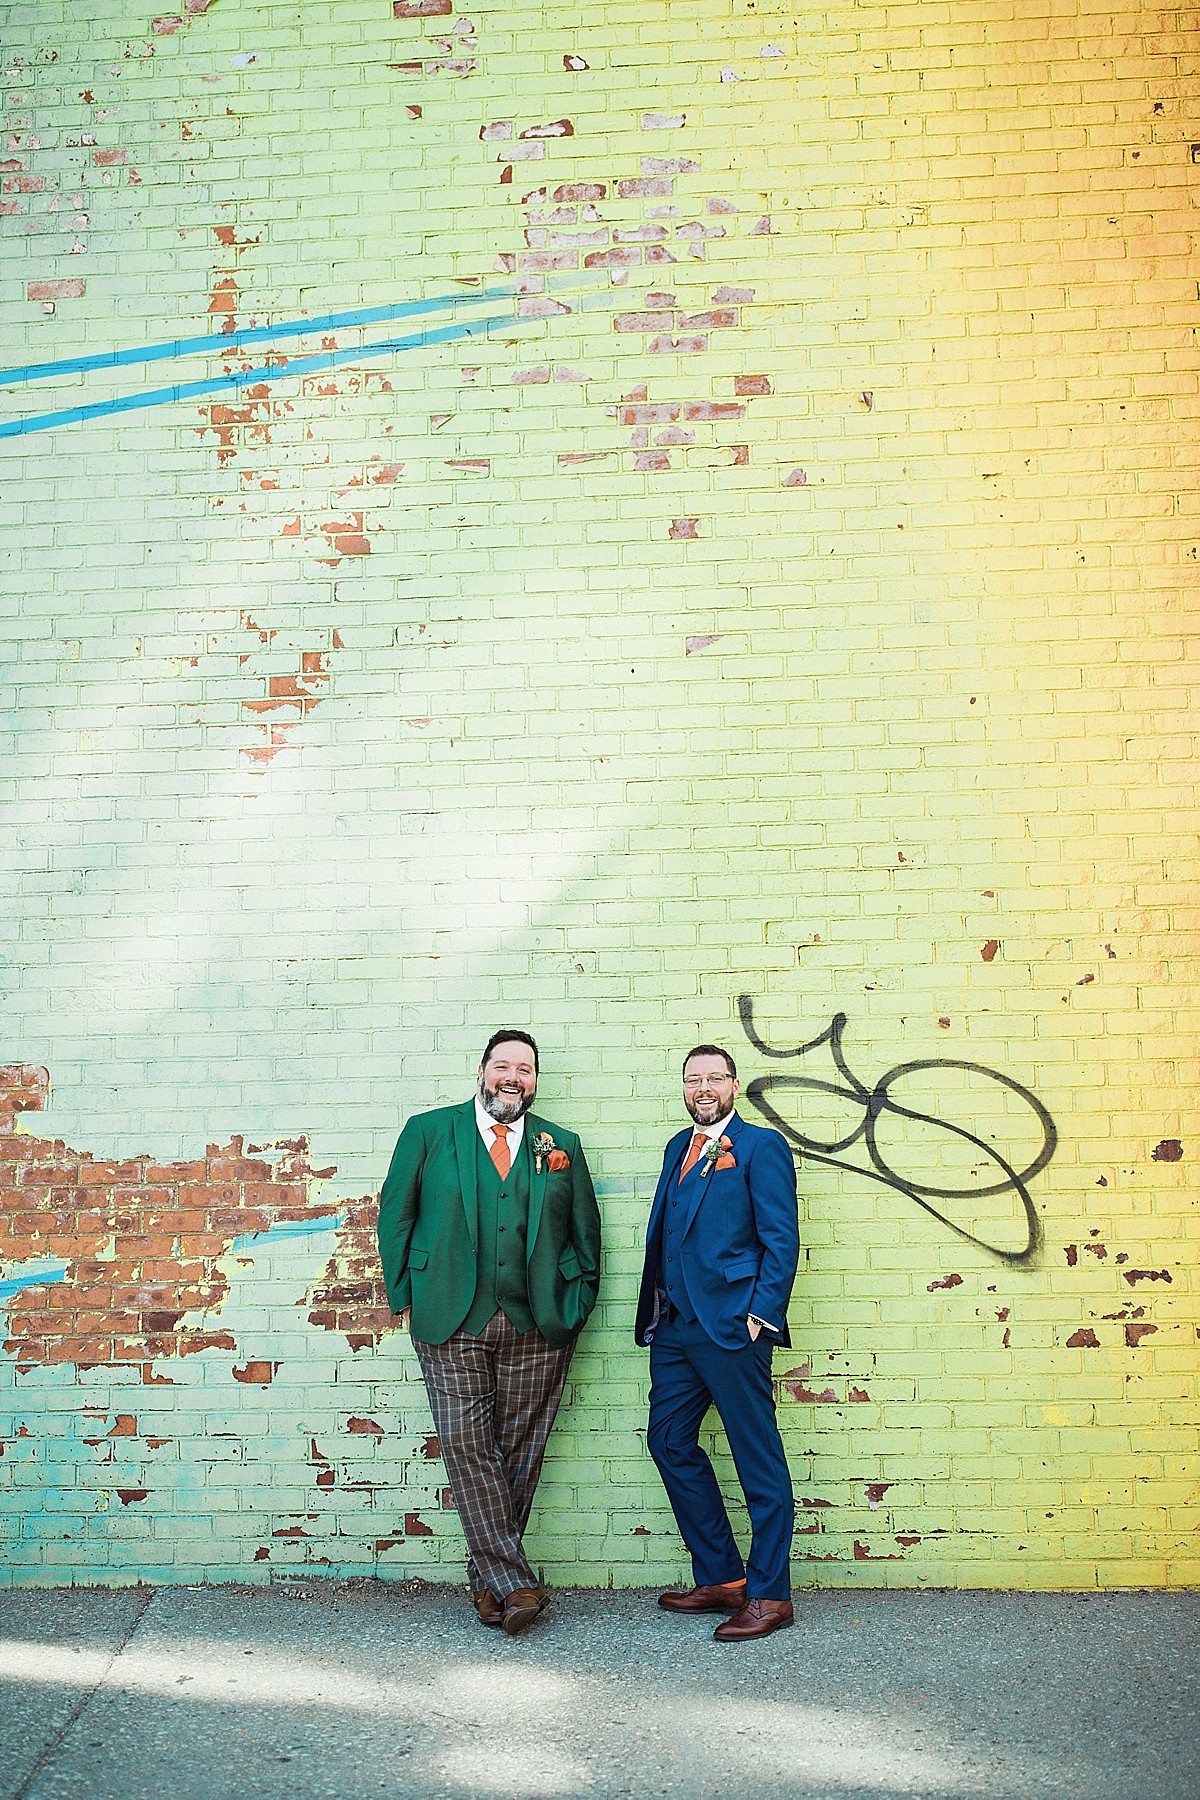 Gran Electrica DUMBO Brooklyn Wedding by Clean Plate Picutres